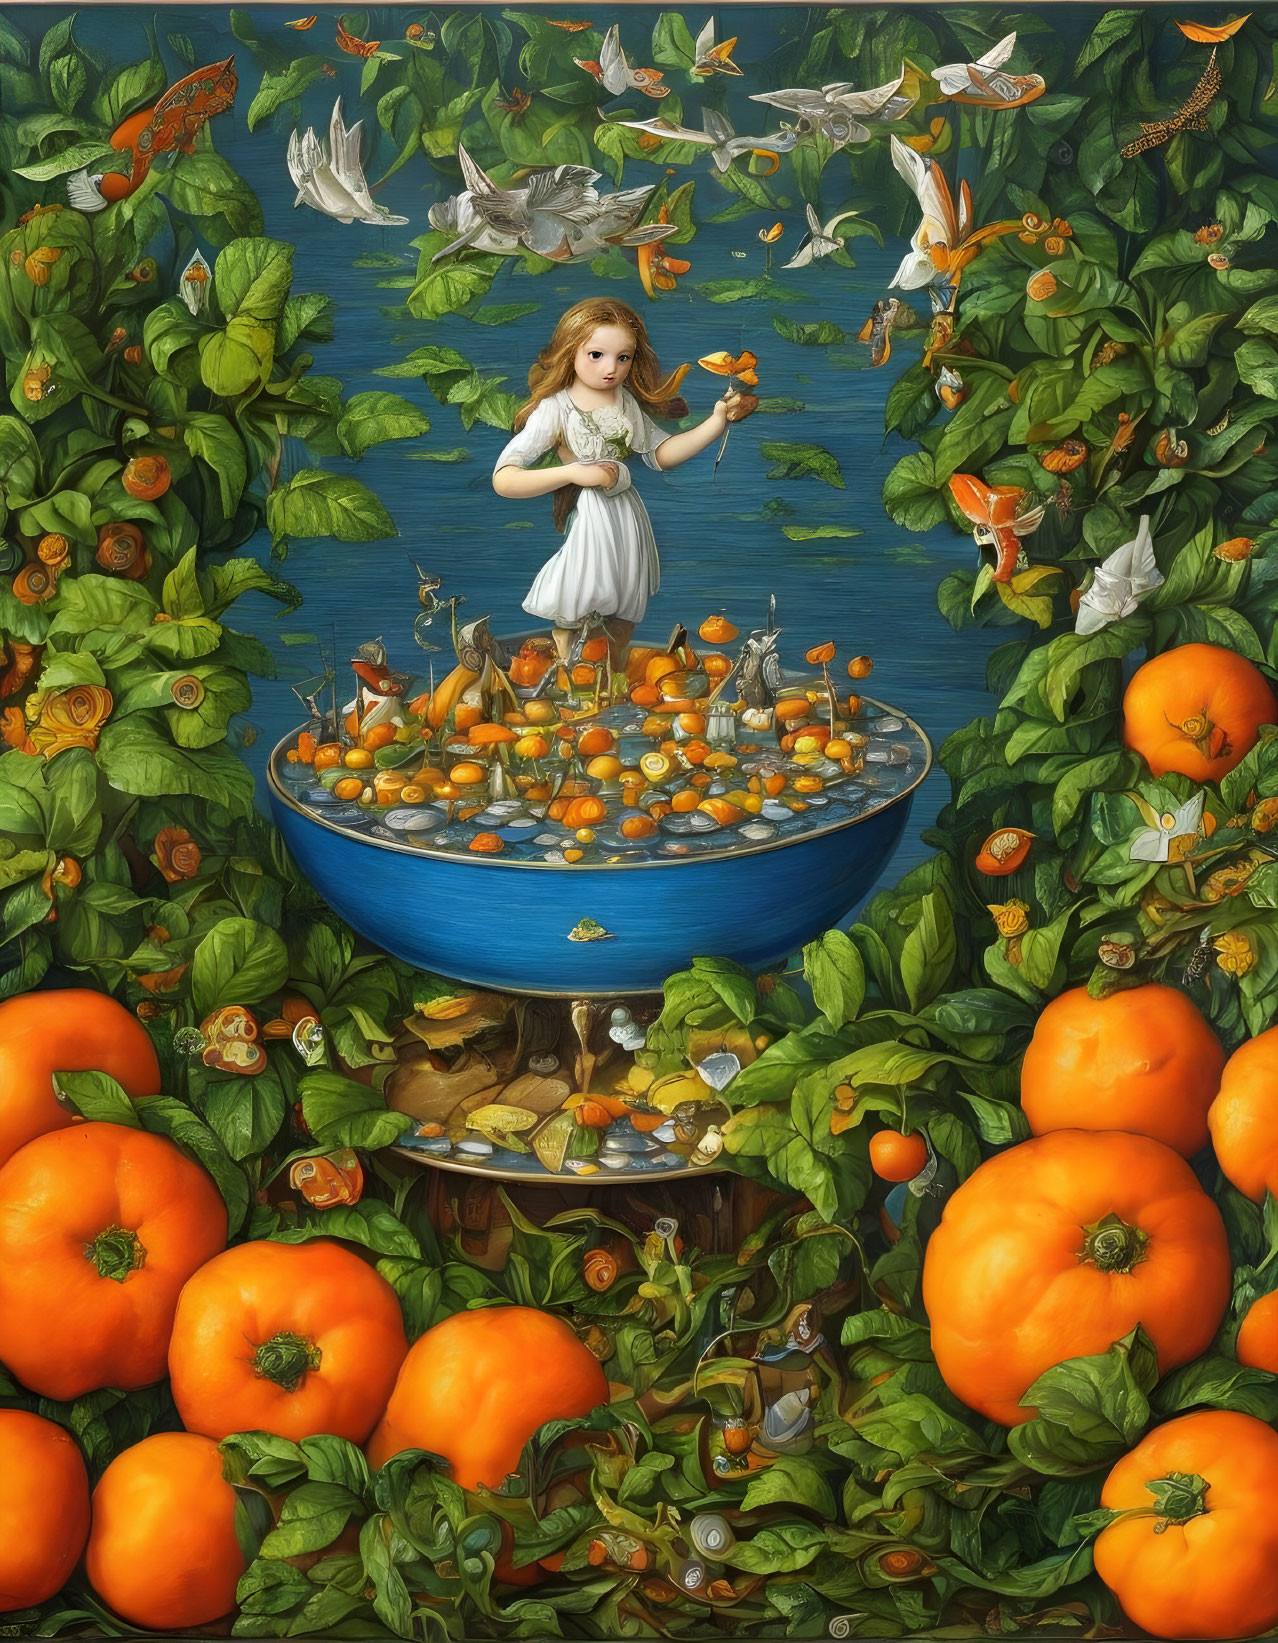 Girl on pedestal with birds, oranges, and foliage in whimsical scene